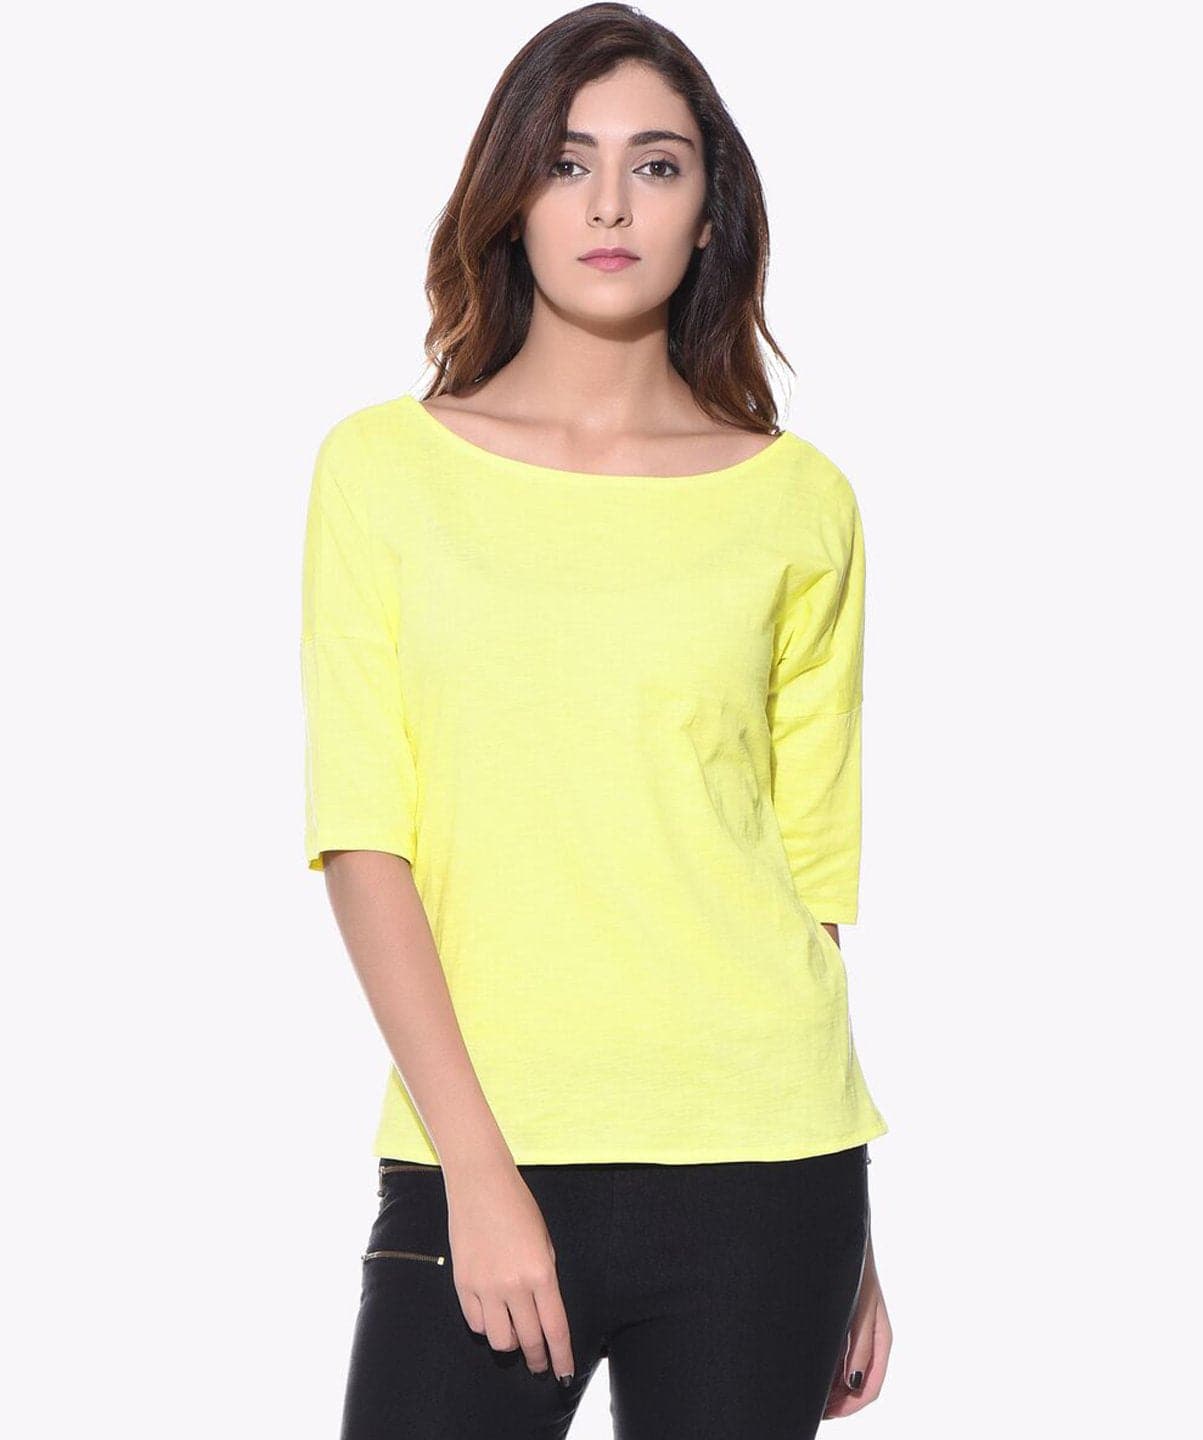 Uptownie Plus Solid Yellow Casual T-shirt (cotton) - Uptownie